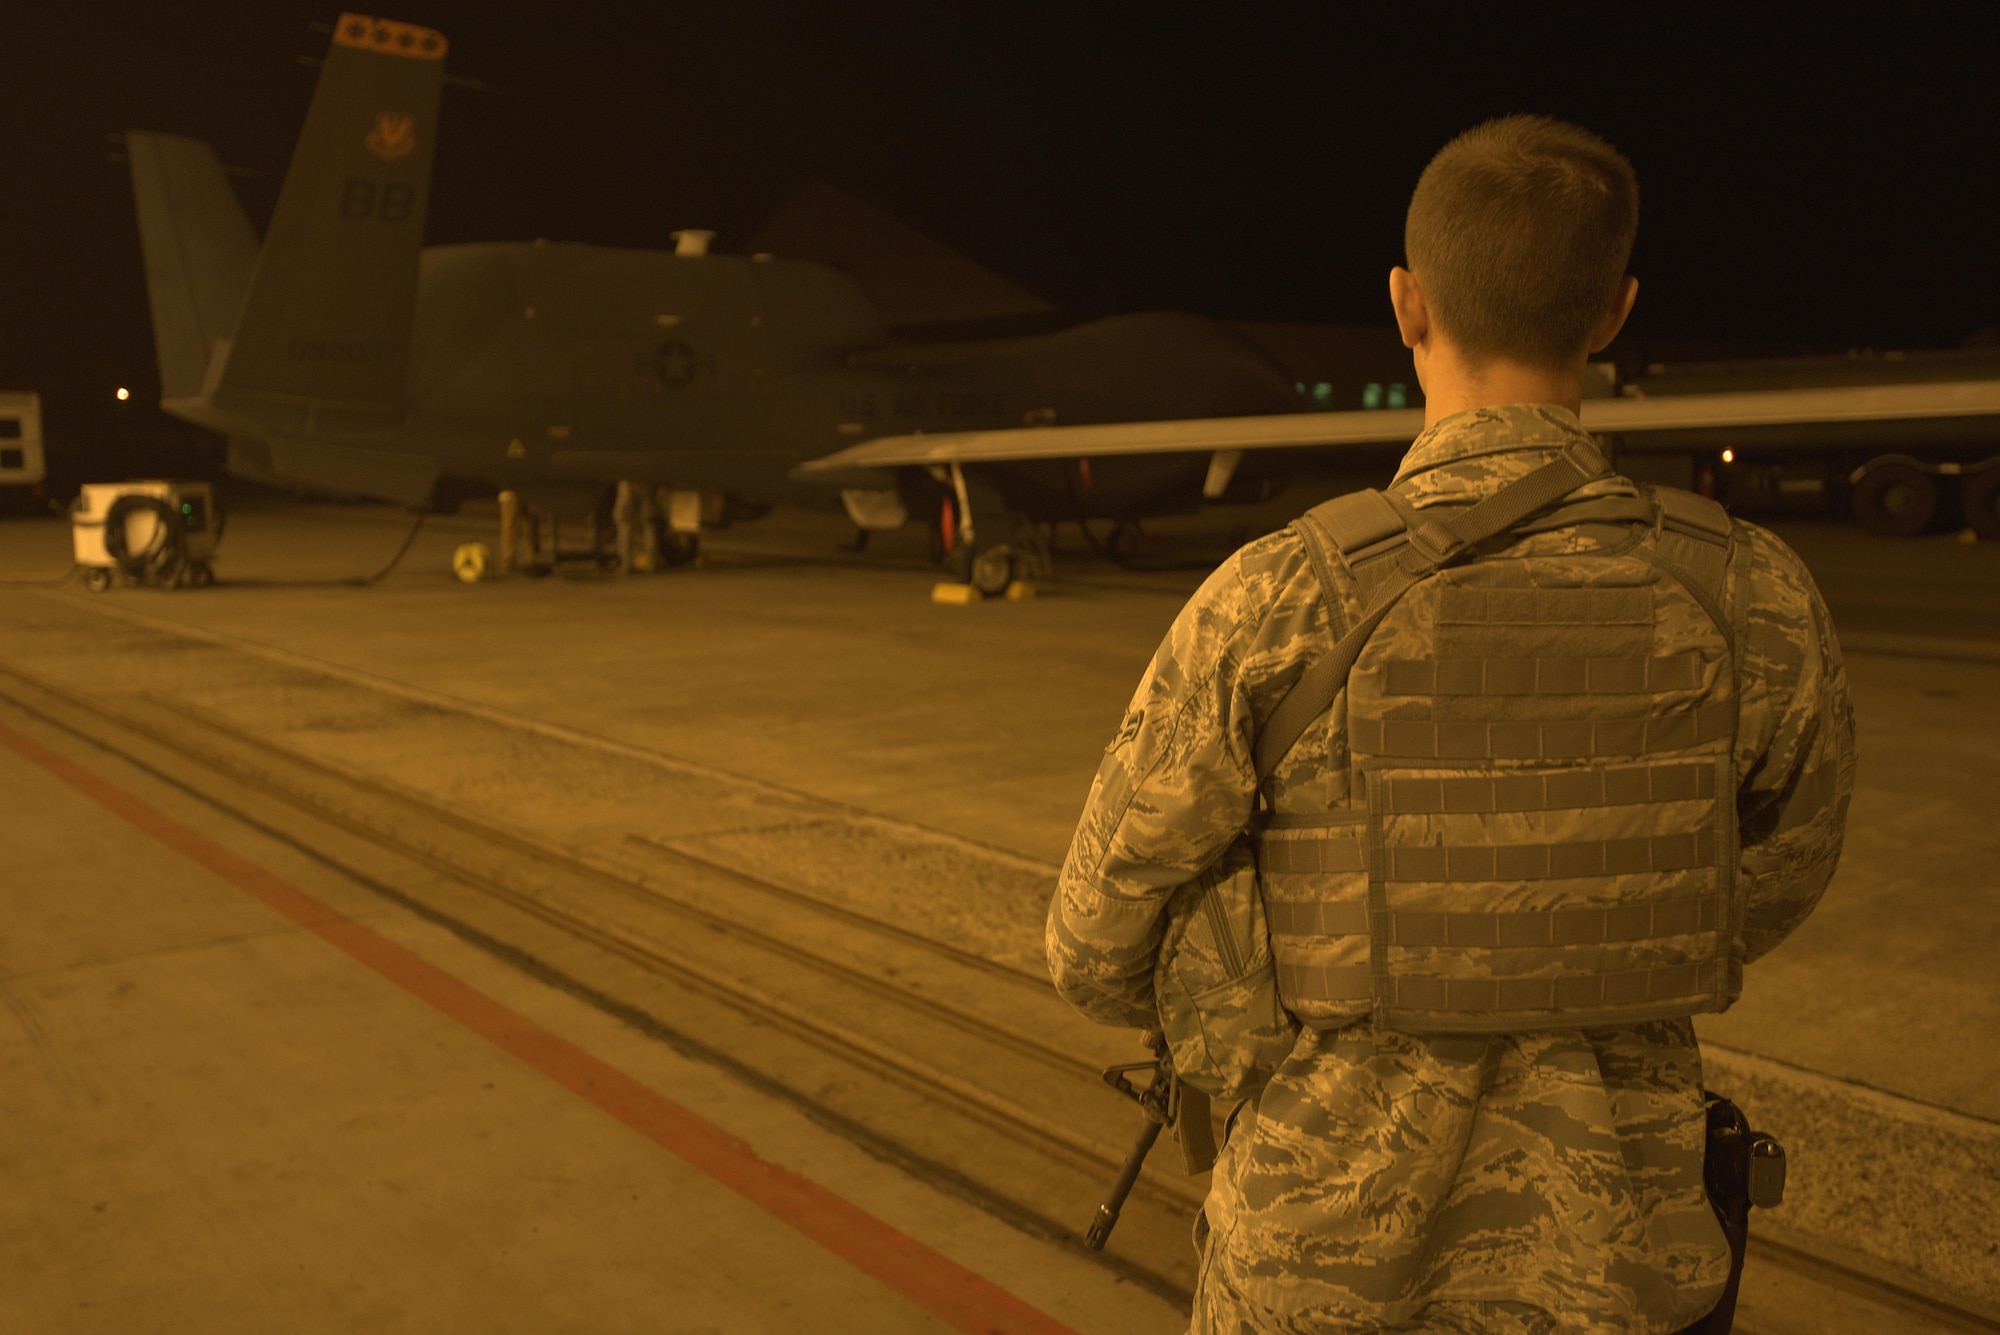 U.S. Air Force Airman 1st Class Caleb Kenley, 35th Security Forces Squadron installation entry controller, oversees the security of a RQ-4 Global Hawk at Misawa Air Base, Japan, Aug. 19, 2015. During the RQ-4’s six-month rotation to Misawa, direct safety and security is provided to ensure the aircraft is protected and ready to perform its mission. (U.S. Air Force photo by Senior Airman Jose L. Hernandez-Domitilo/Released)